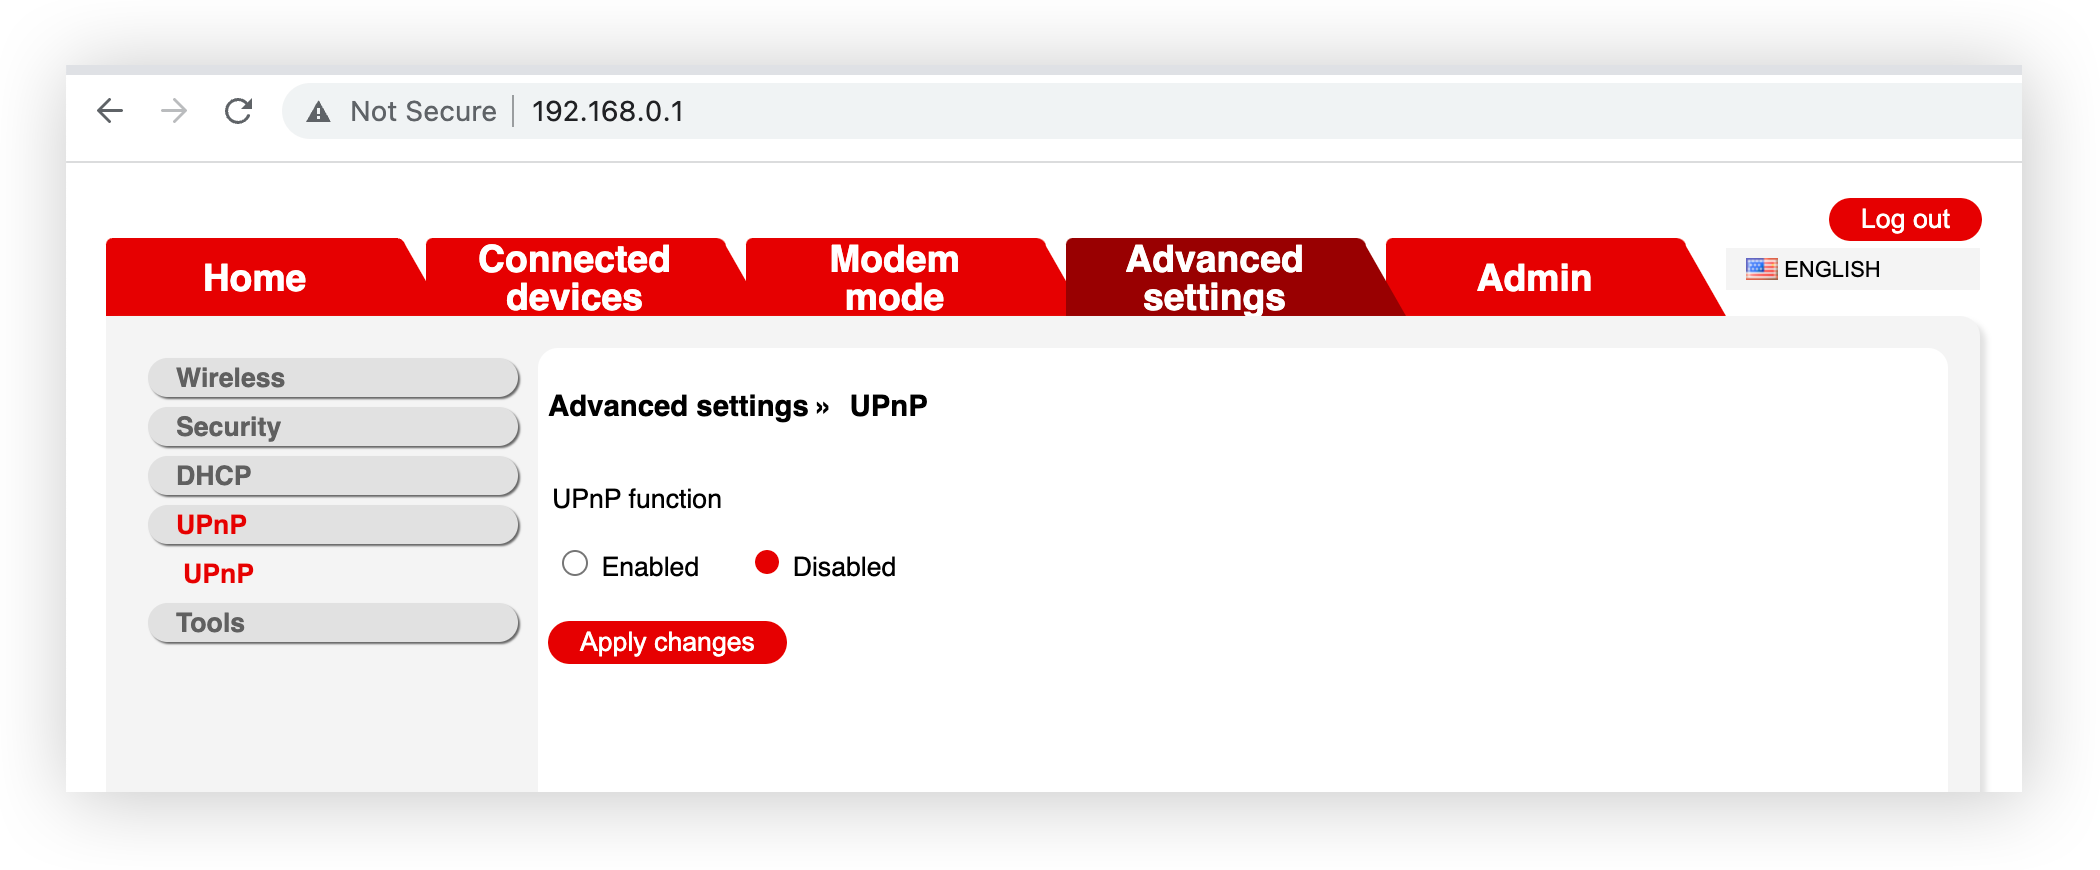 To enable or disable UPnP on your router, go to your Advanced router settings.